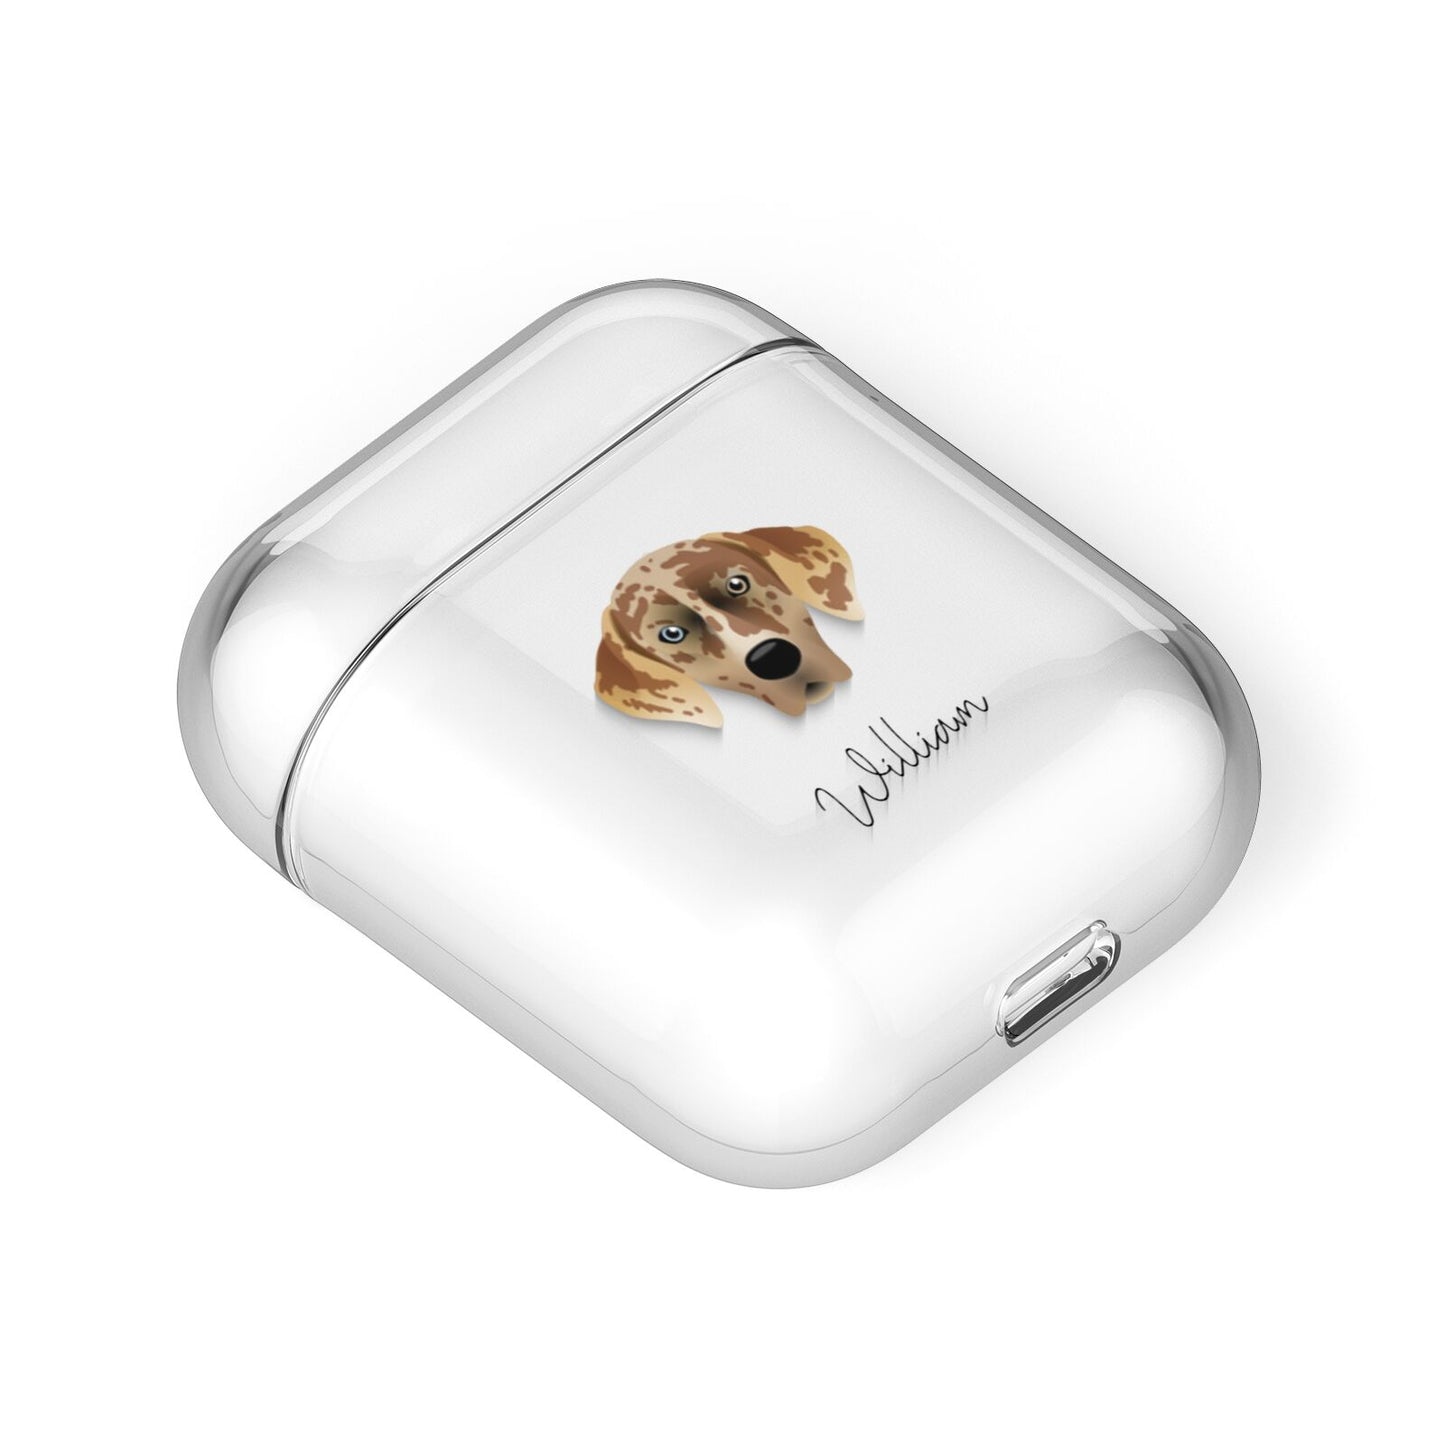 American Leopard Hound Personalised AirPods Case Laid Flat